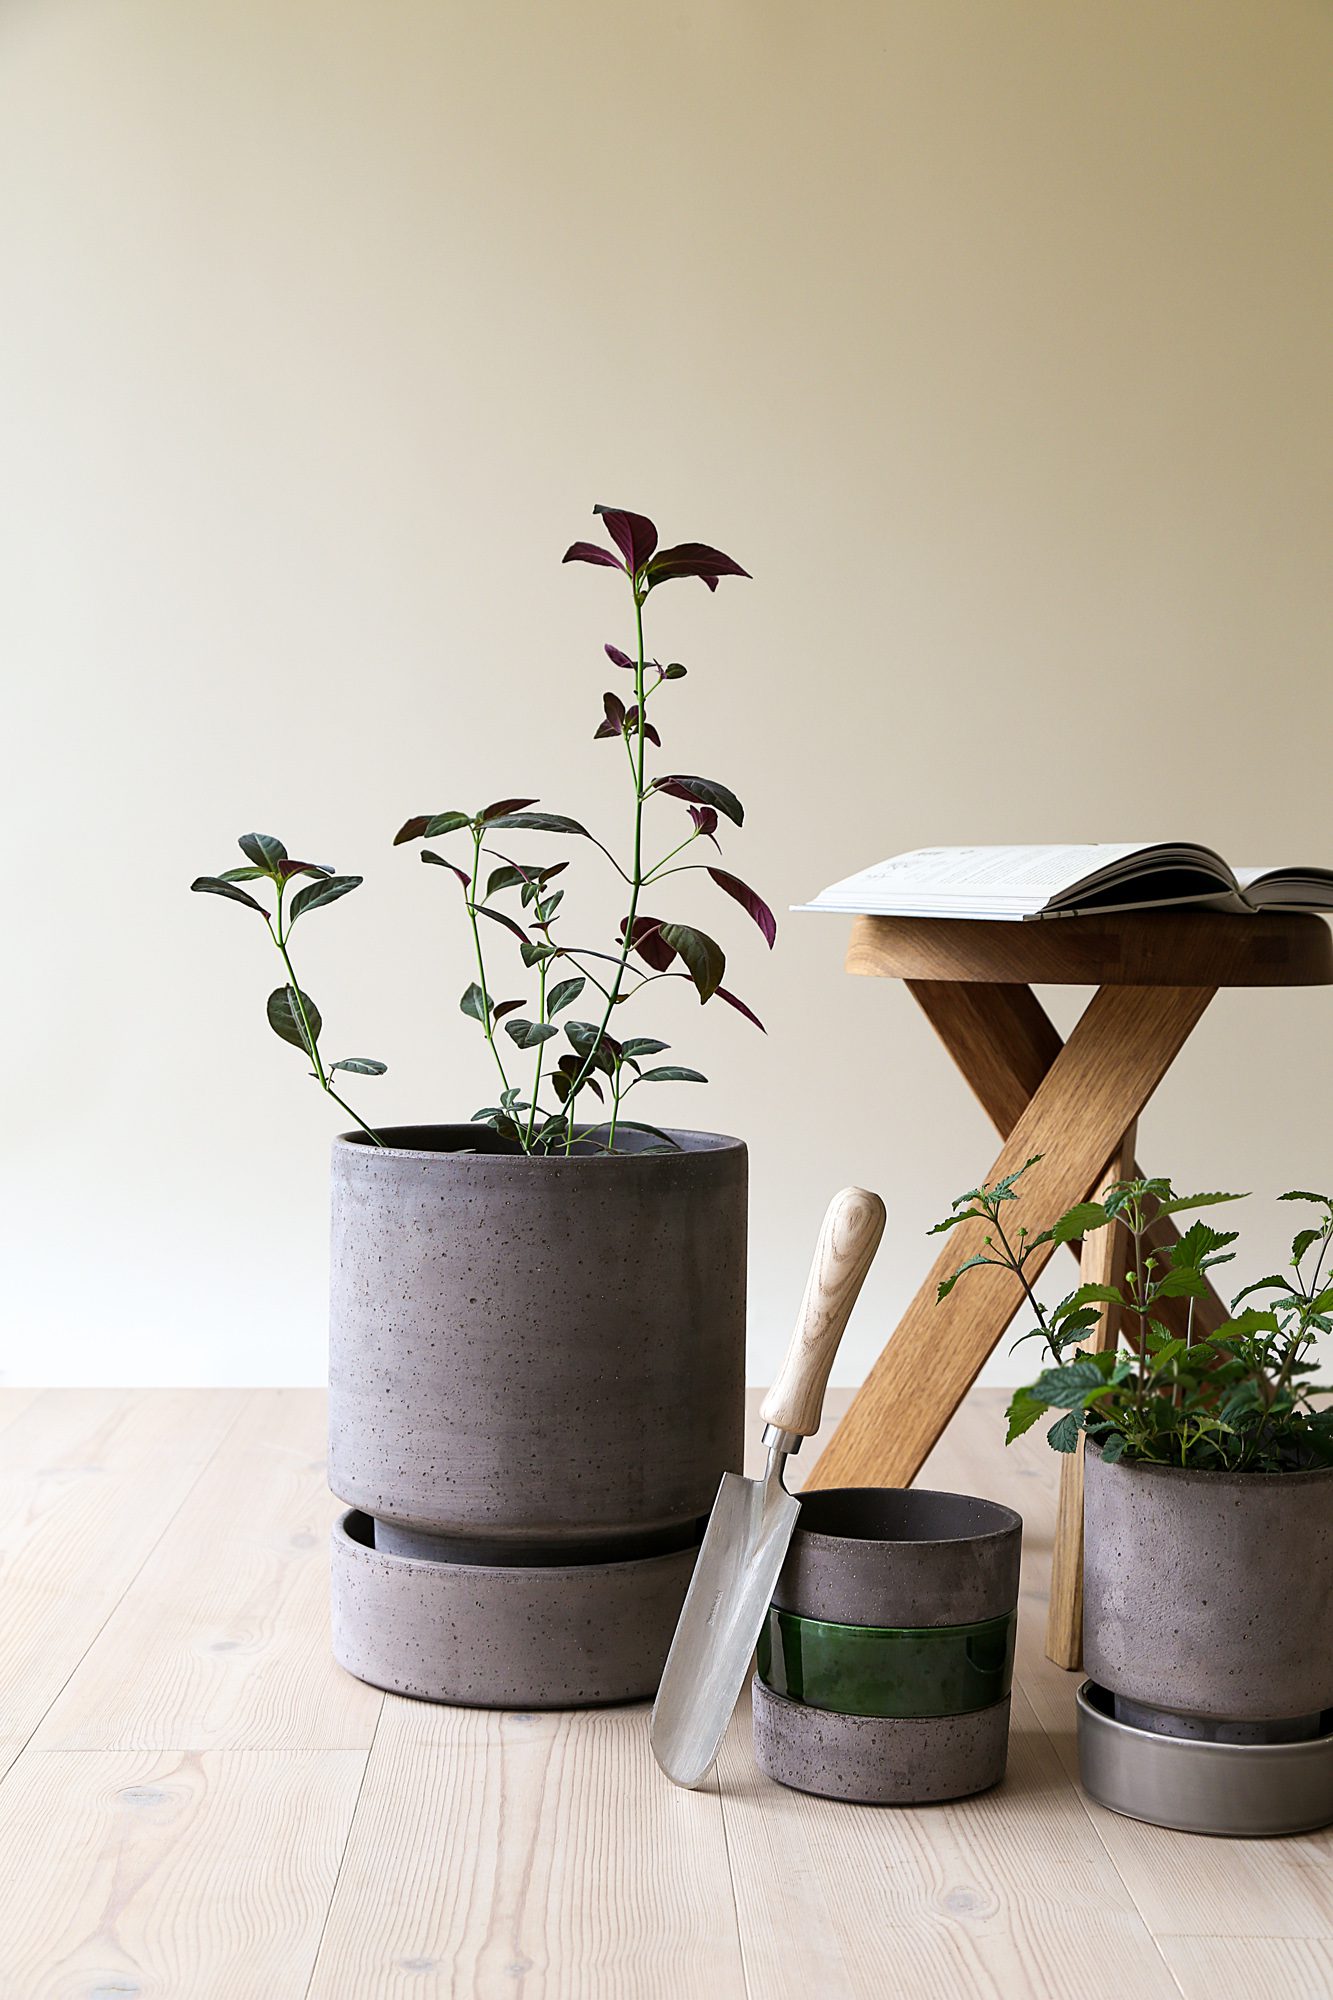 Hoff pots with plants next to chair